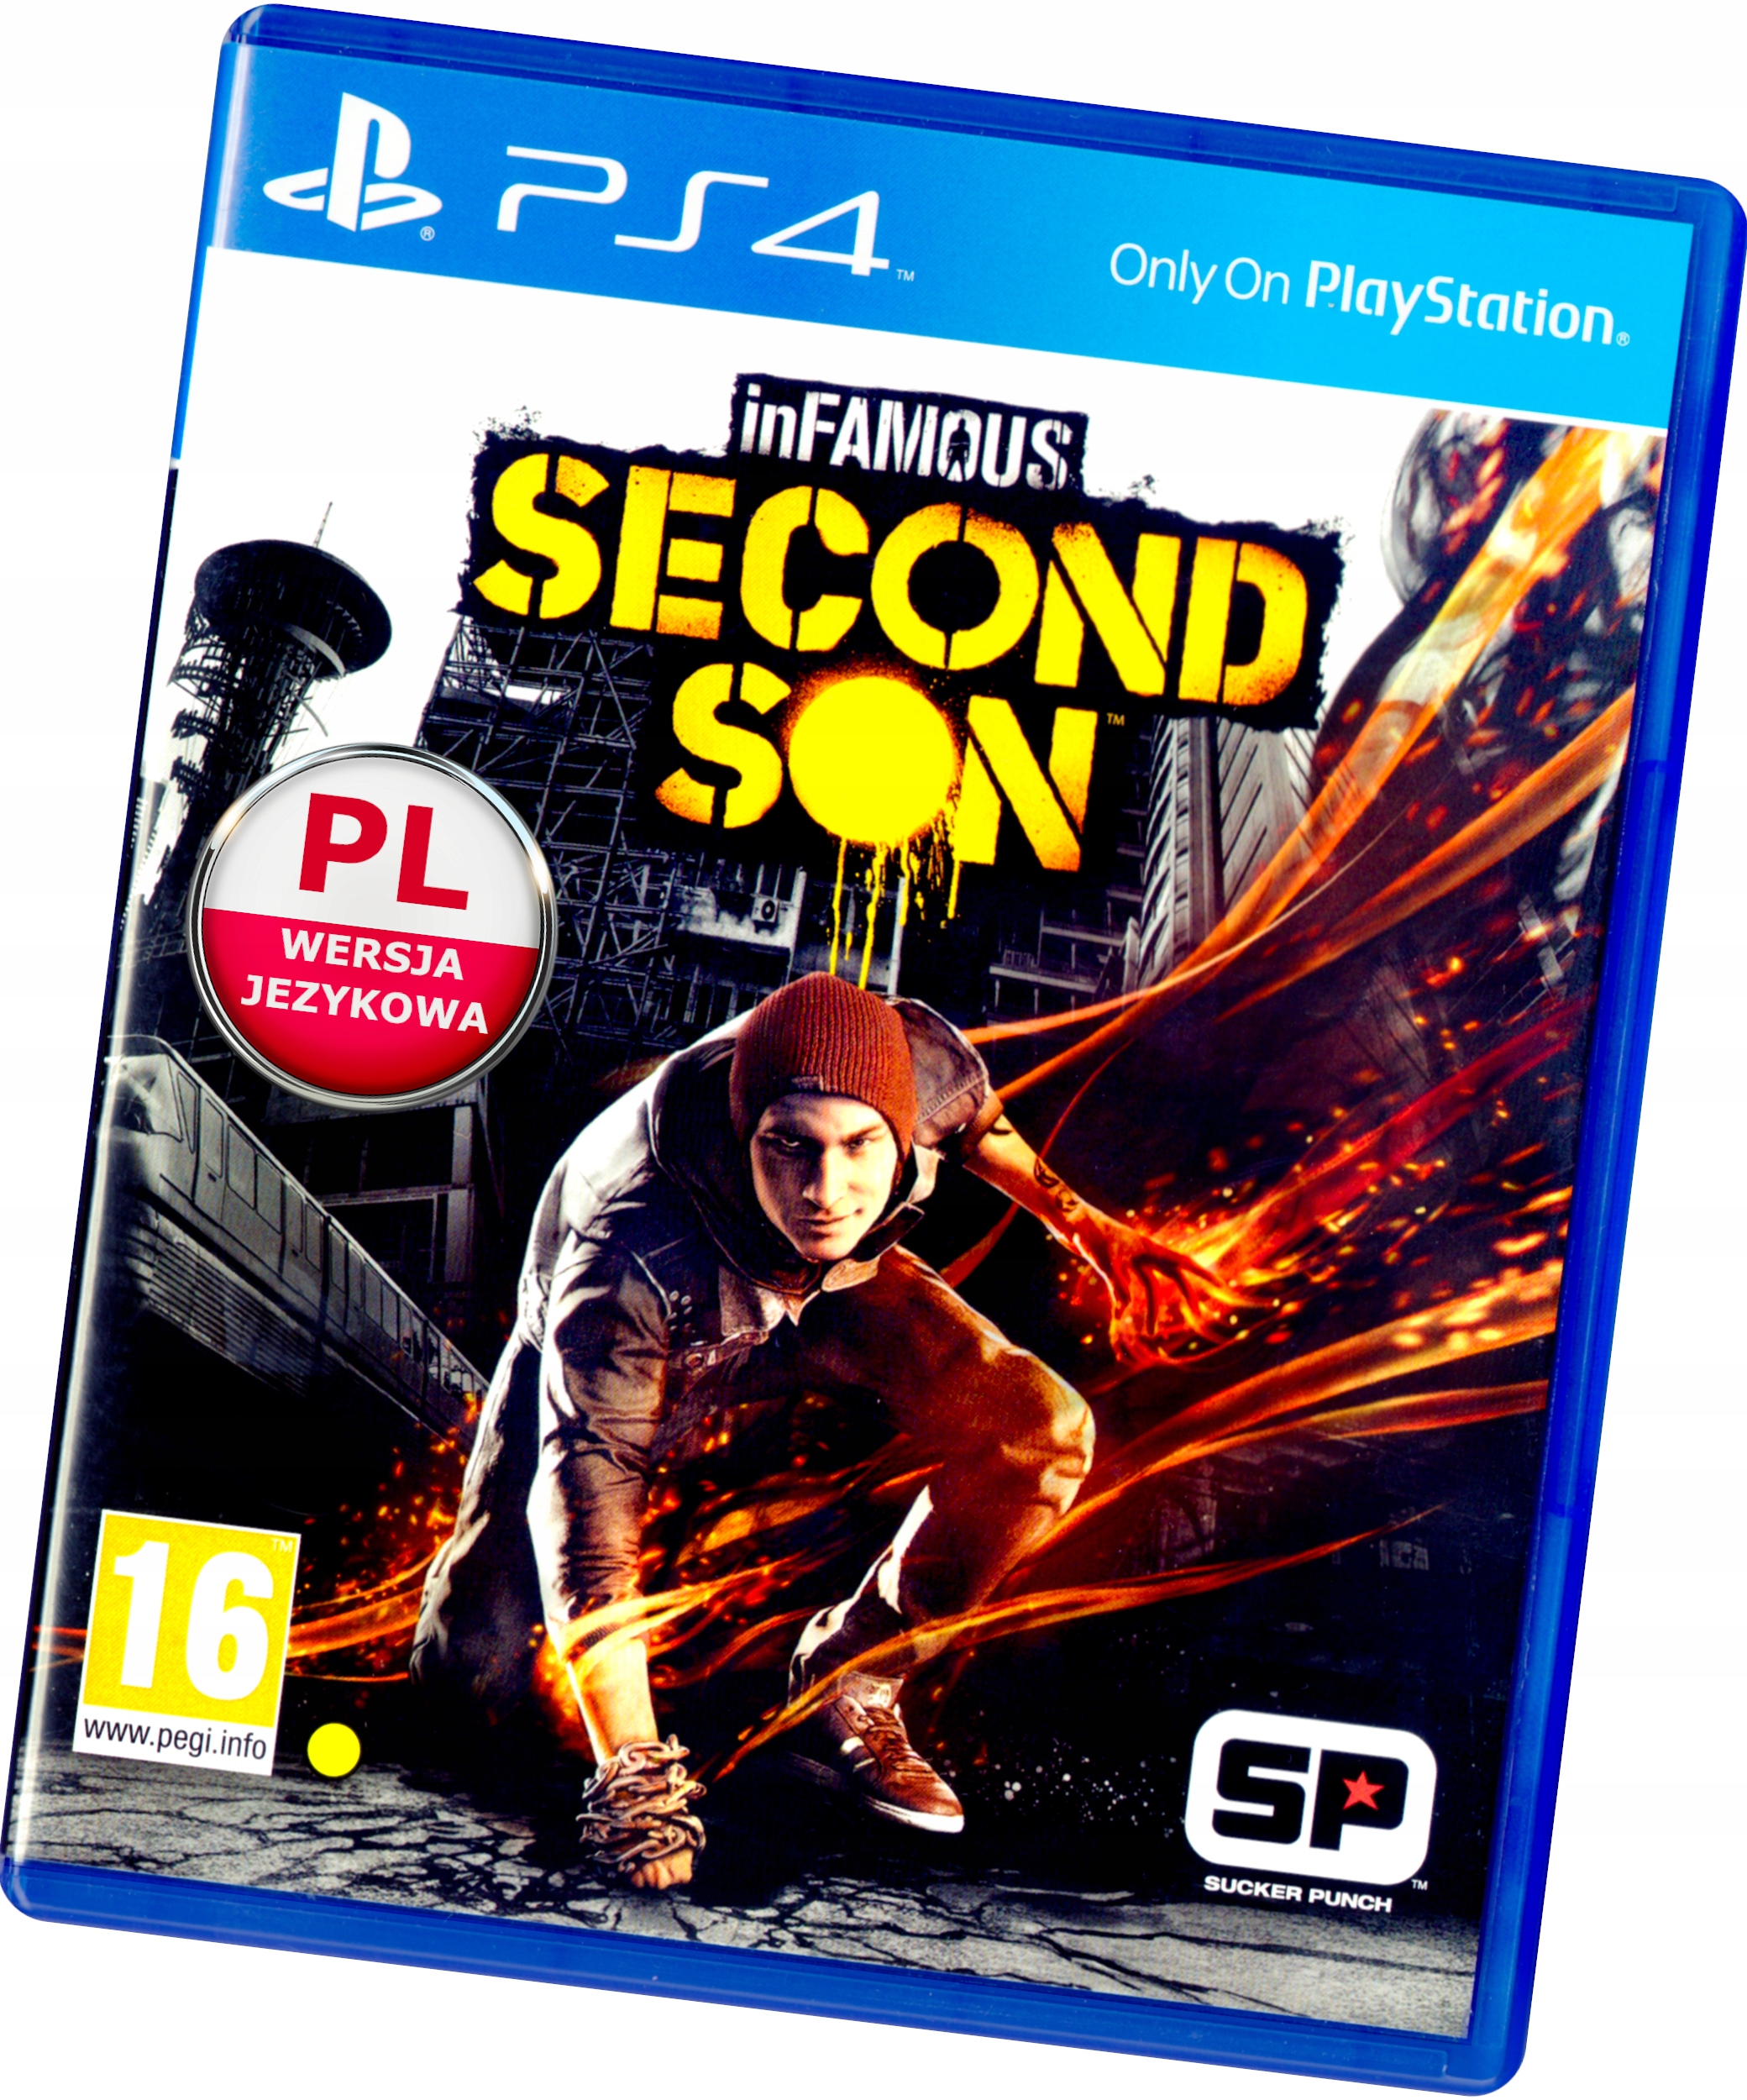 Infamous Second Son Pl Dubbing Ps4 Pudelkowa Nowa Stan Nowy 9272321573 Allegro Pl